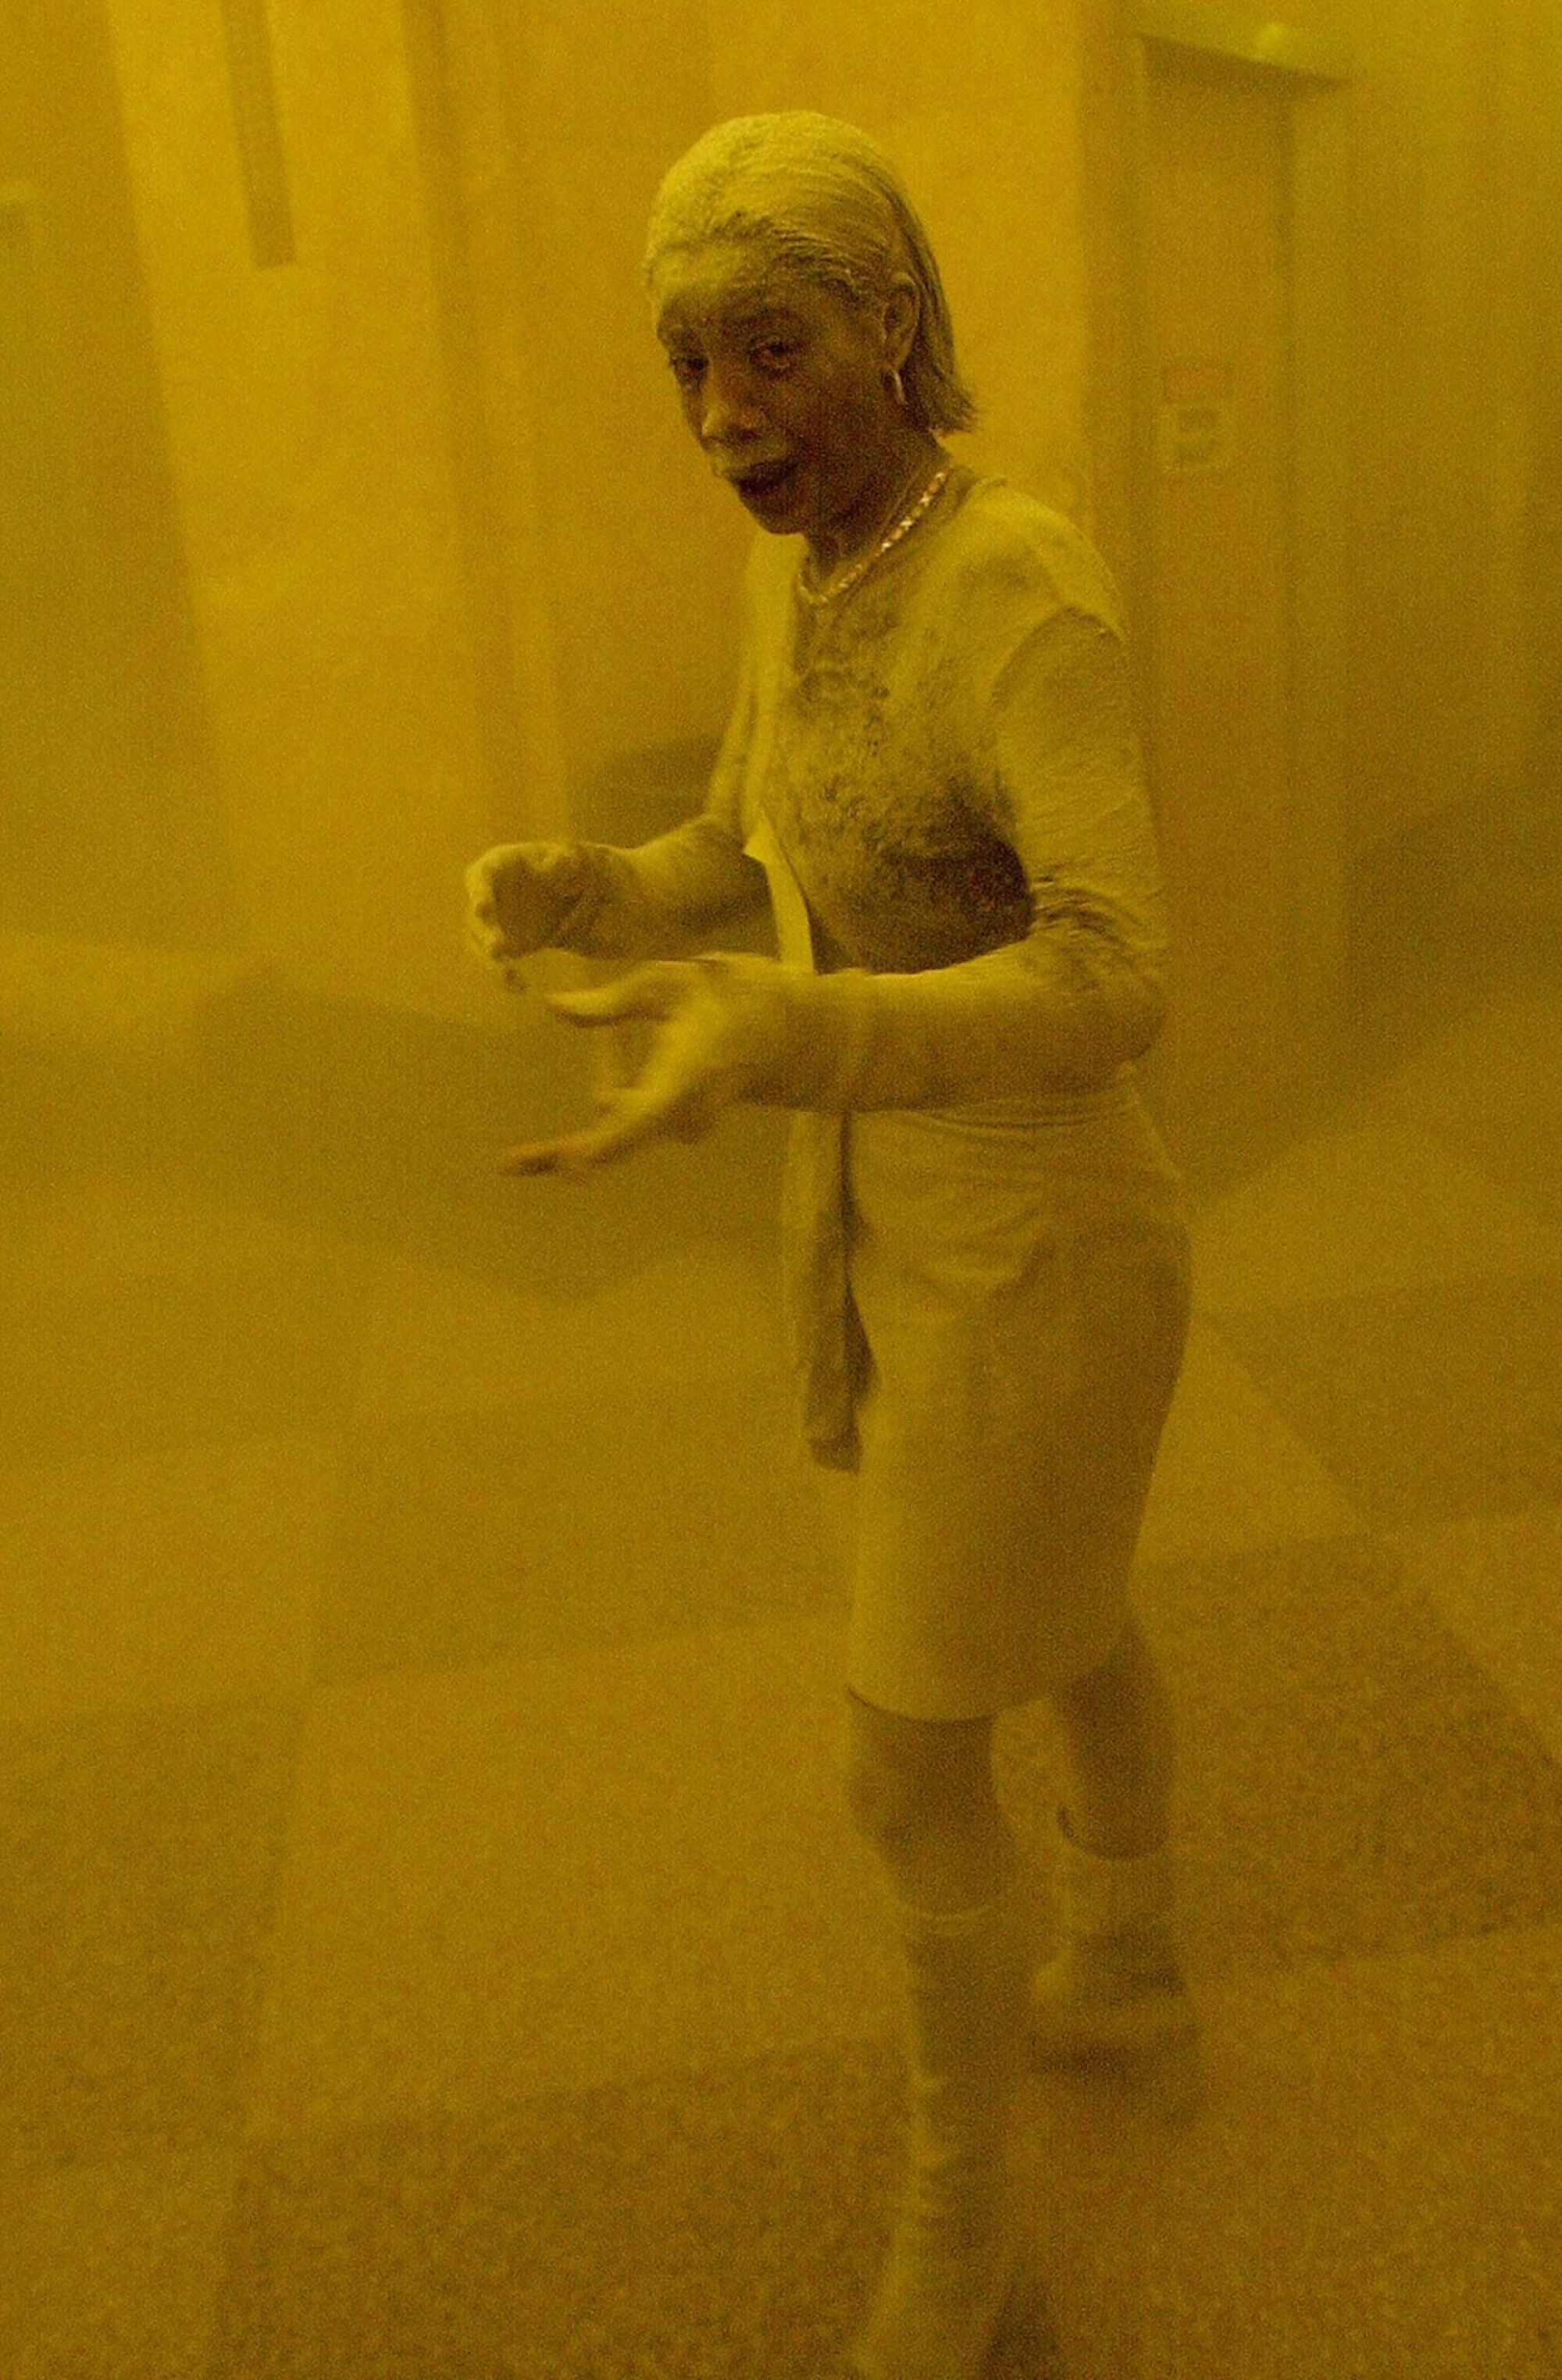 A woman is covered in dust